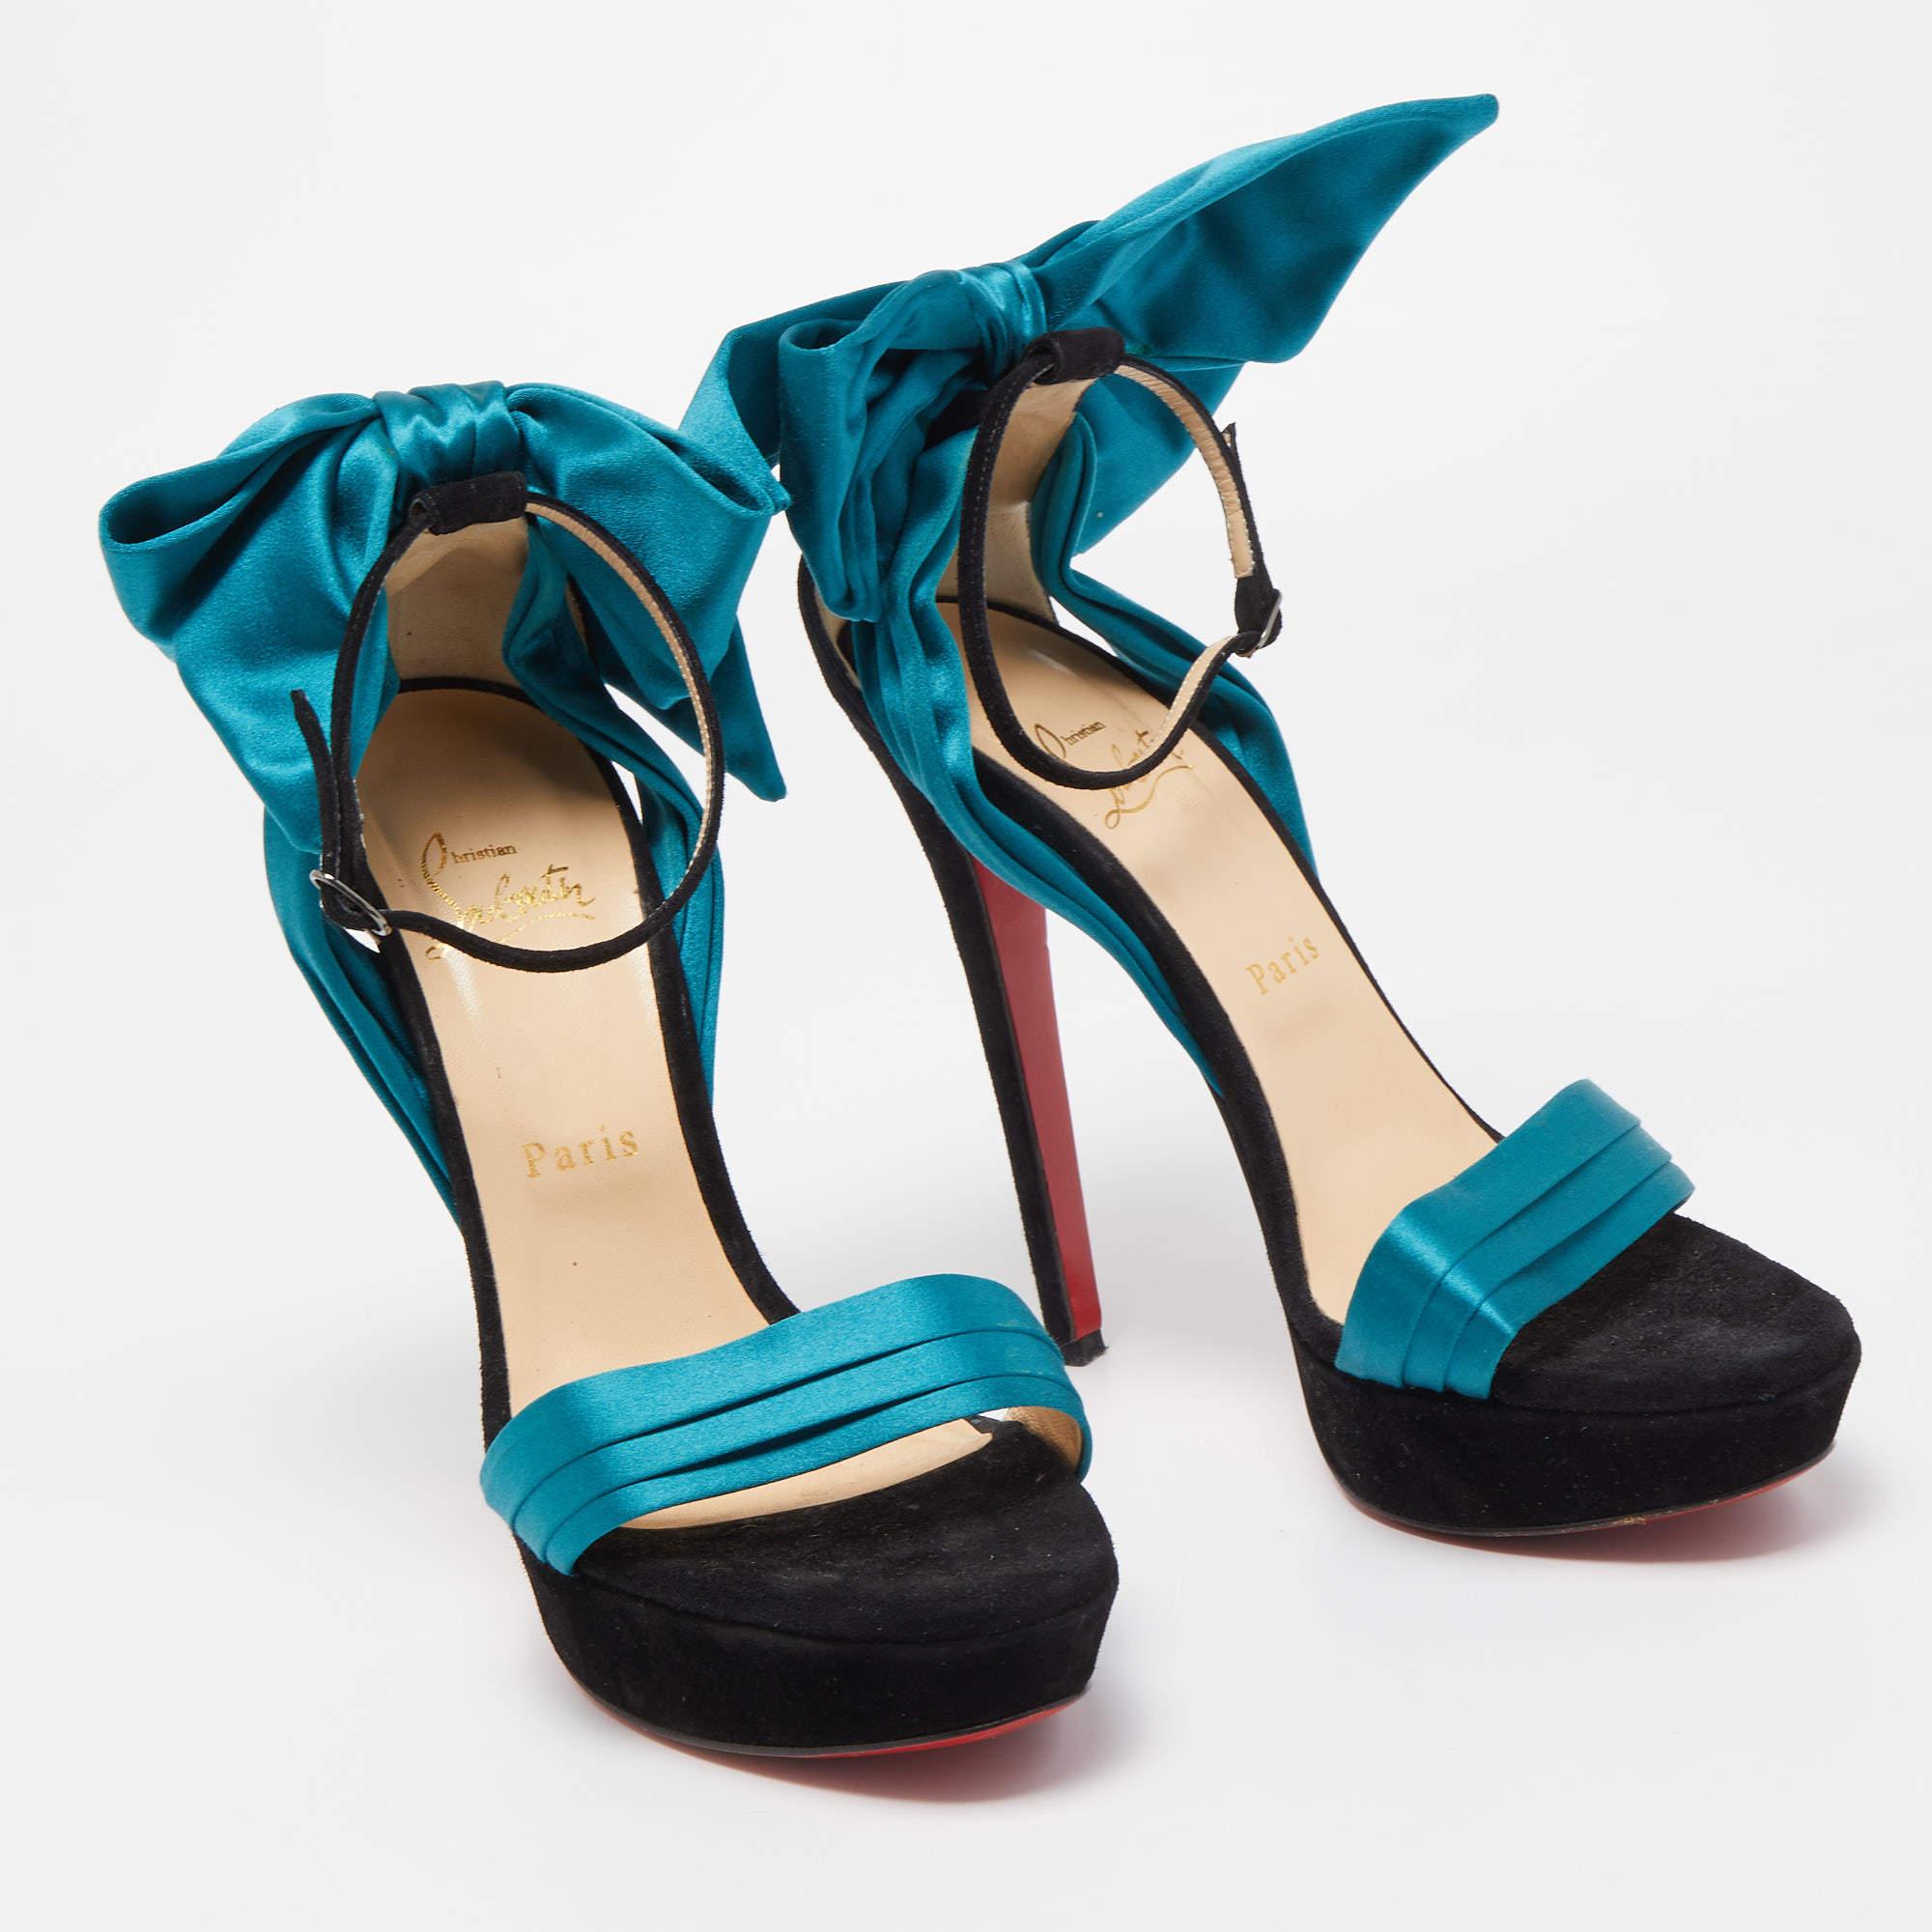 Blue Christian Louboutin Teal/Black Satin and Suede Vampanodo Sandals Size 40.5